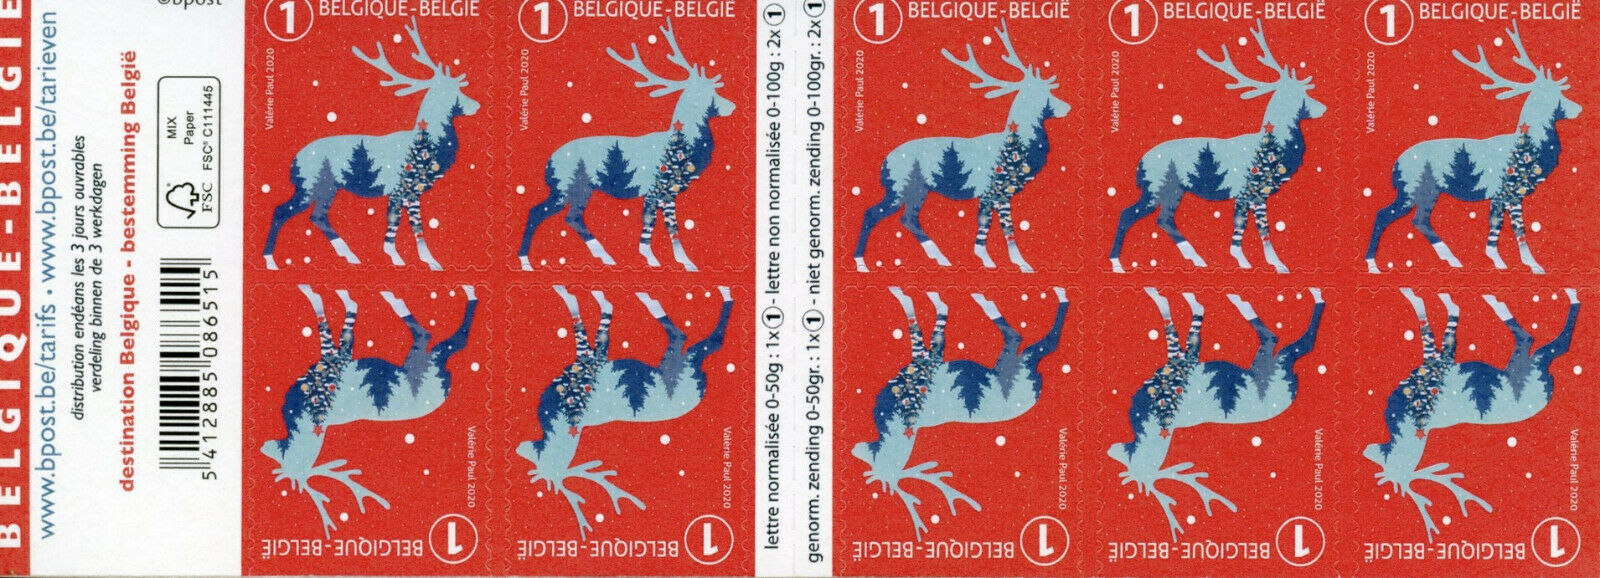 Belgium Christmas Stamps 2020 MNH Reindeer Domestic Value 1 10v S/A Booklet